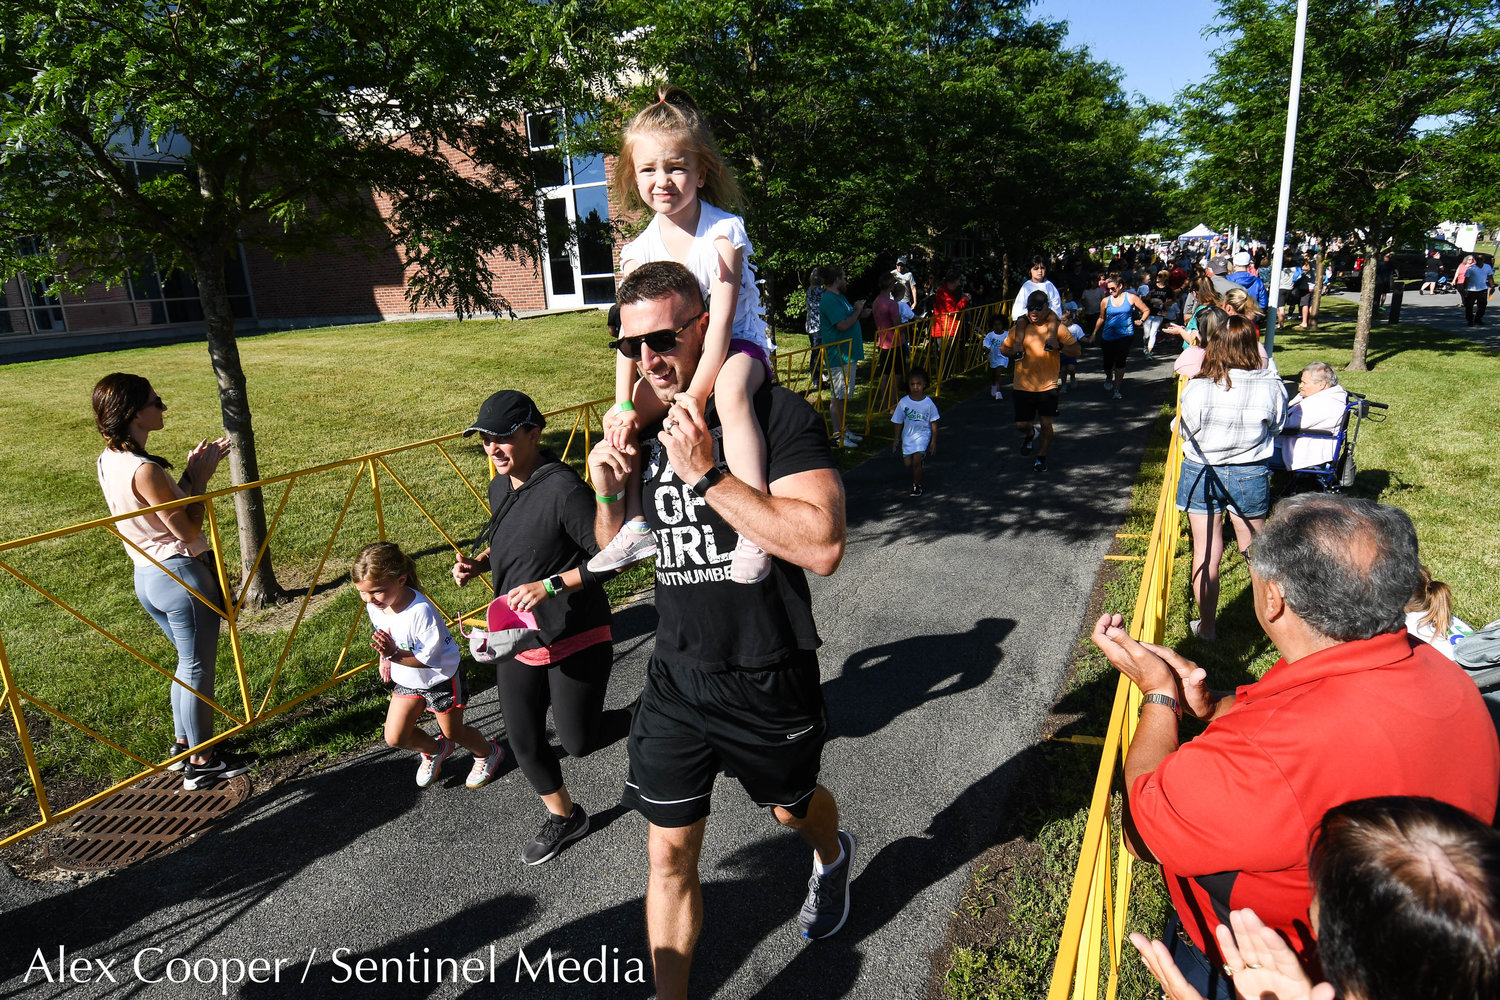 A young girl catches a ride on her dad's shoulders during the Utica National Kids Run at Mohawk Valley Community College in Utica on Saturday.